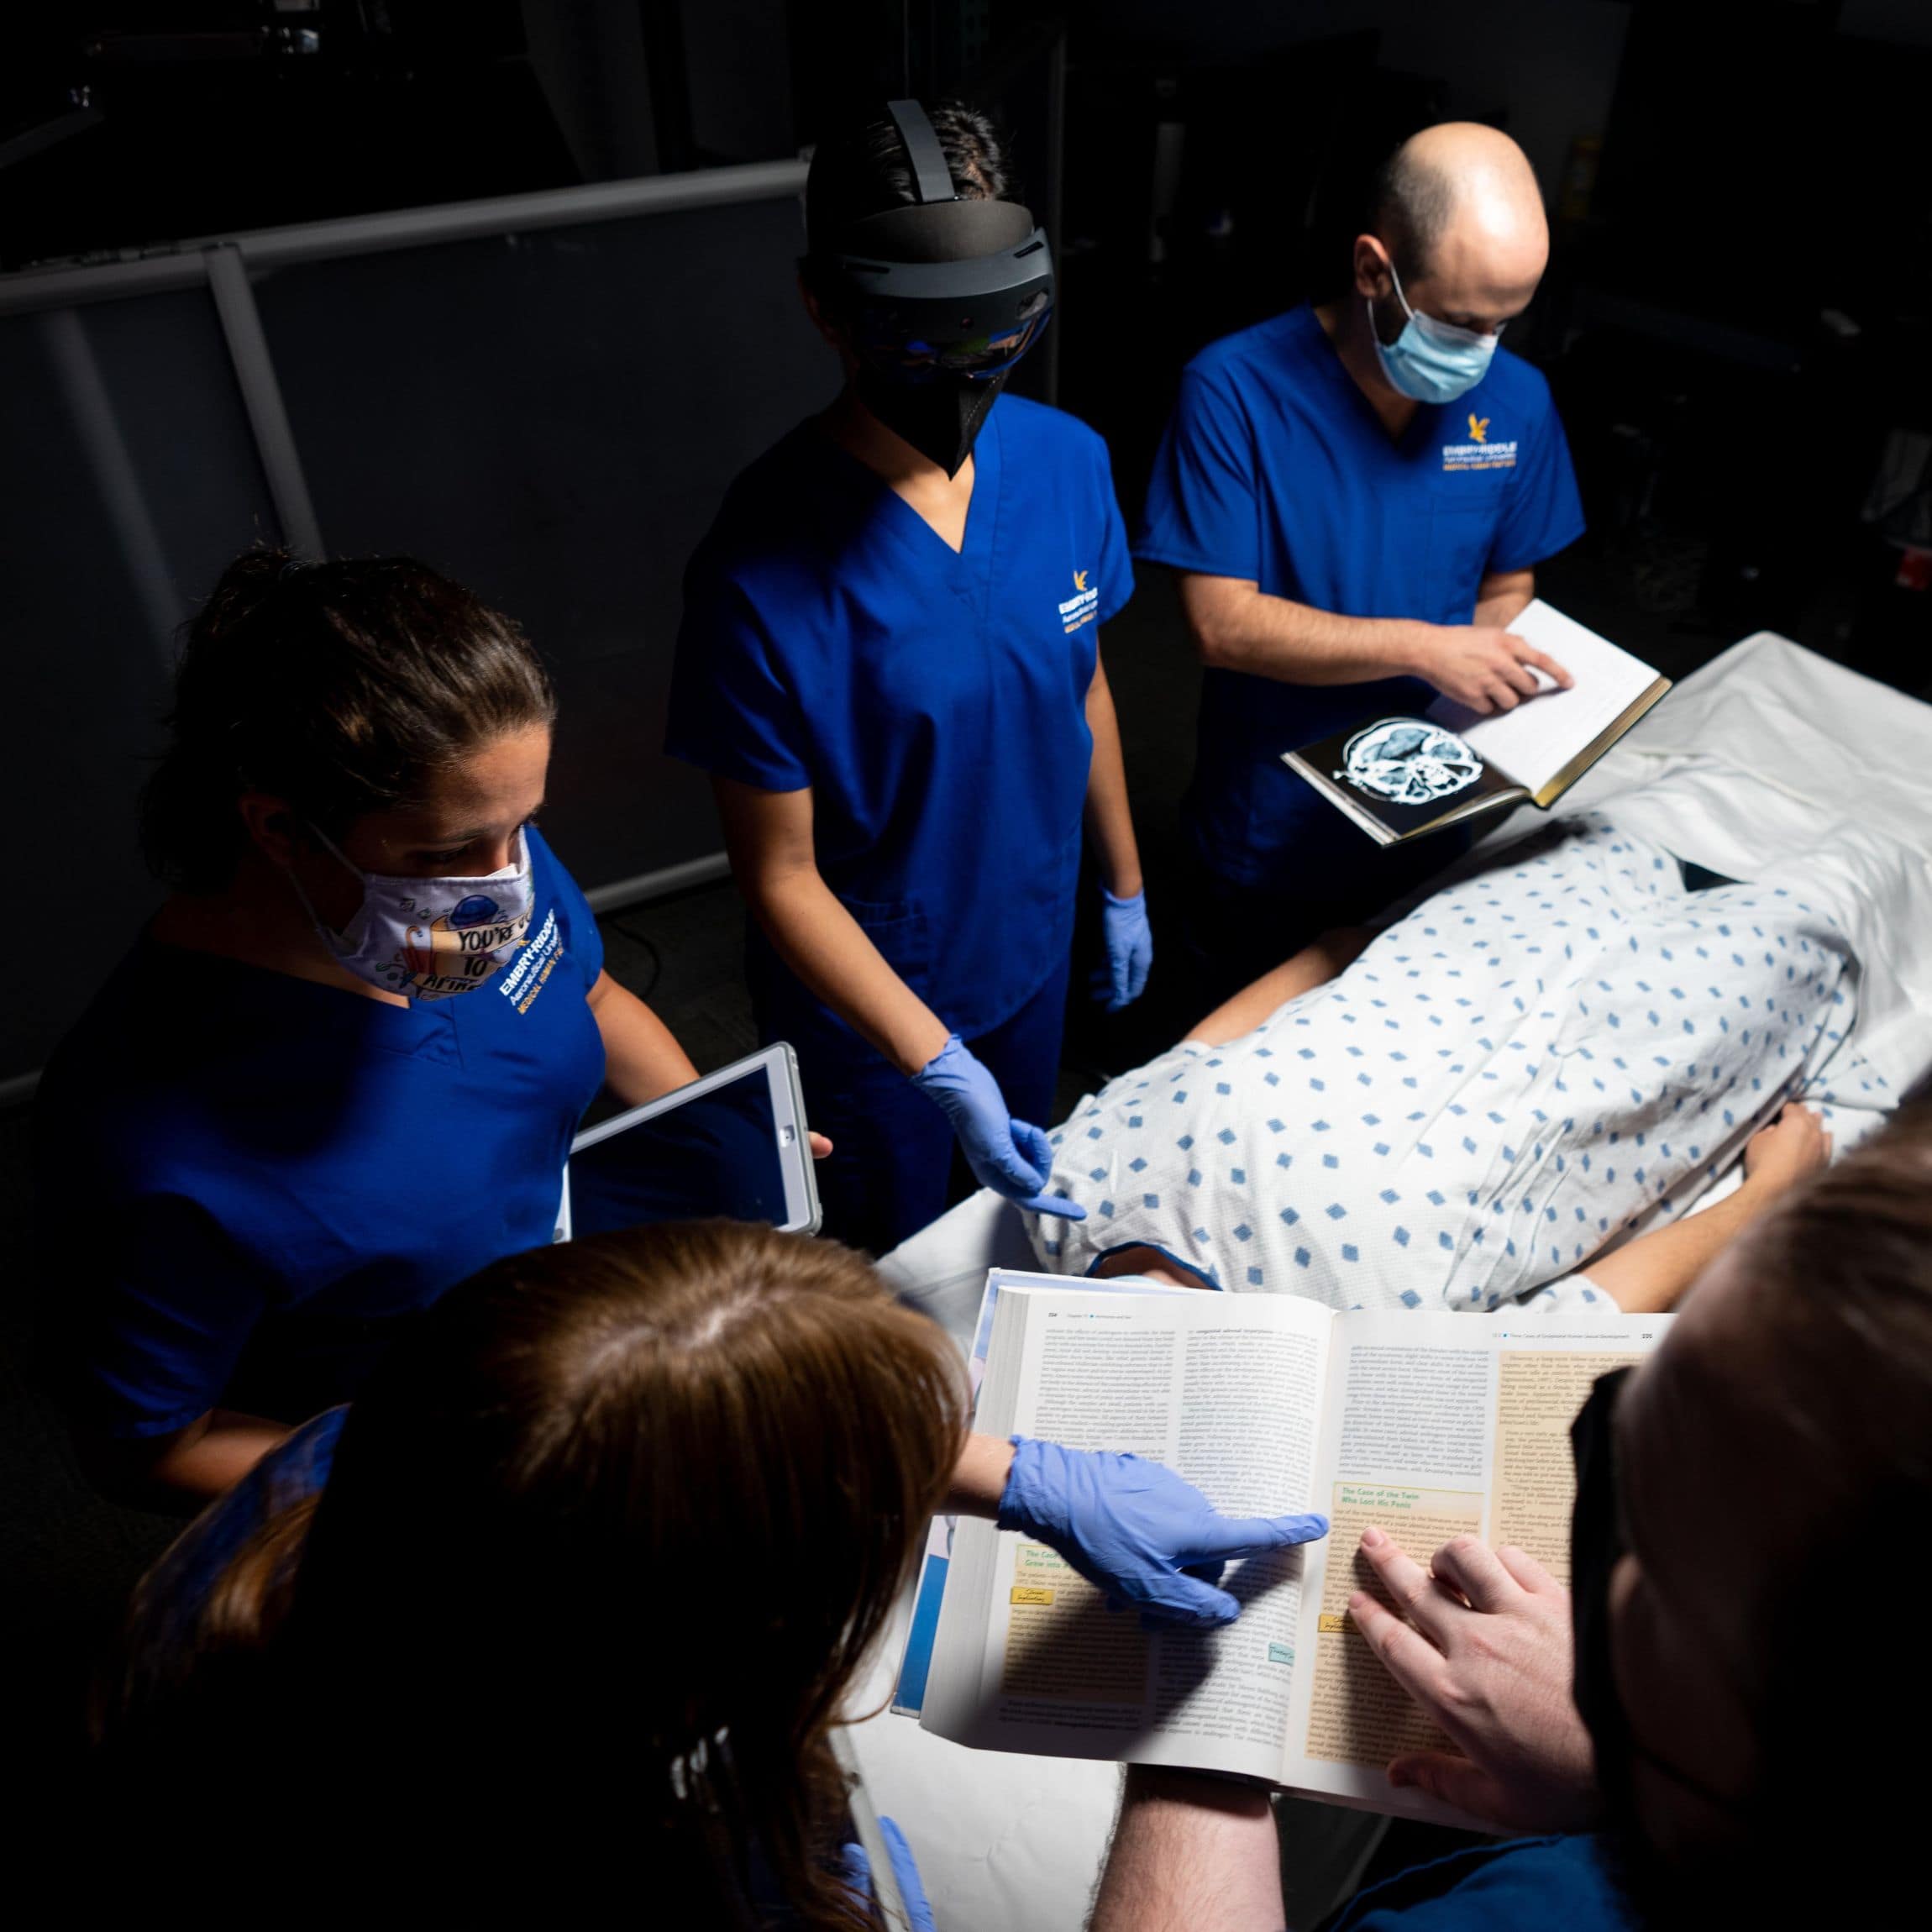 Using a mock hospital scenario, Aerospace Physiology students from the STAR Lab research the logistics and teamwork involved in how healthcare workers “hand off” patients from one team to another. (Embry-Riddle/David Massey)